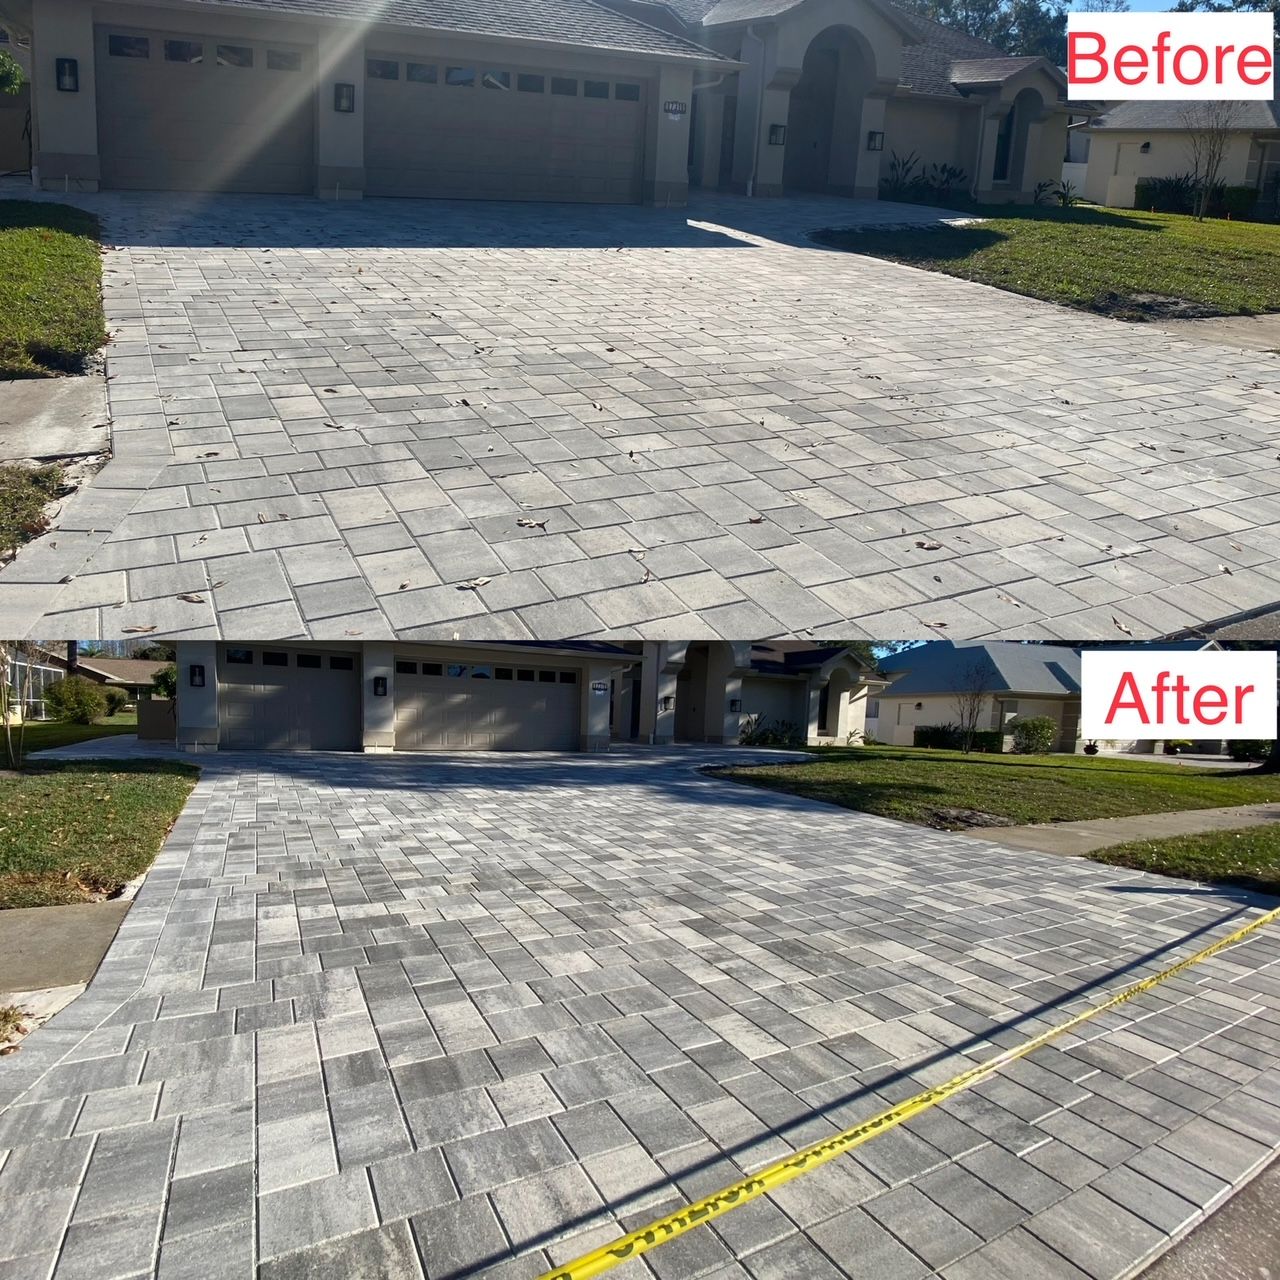 White/Pewter Pavers  on driveway Before and After cleaning and sealingin Tampa, FL